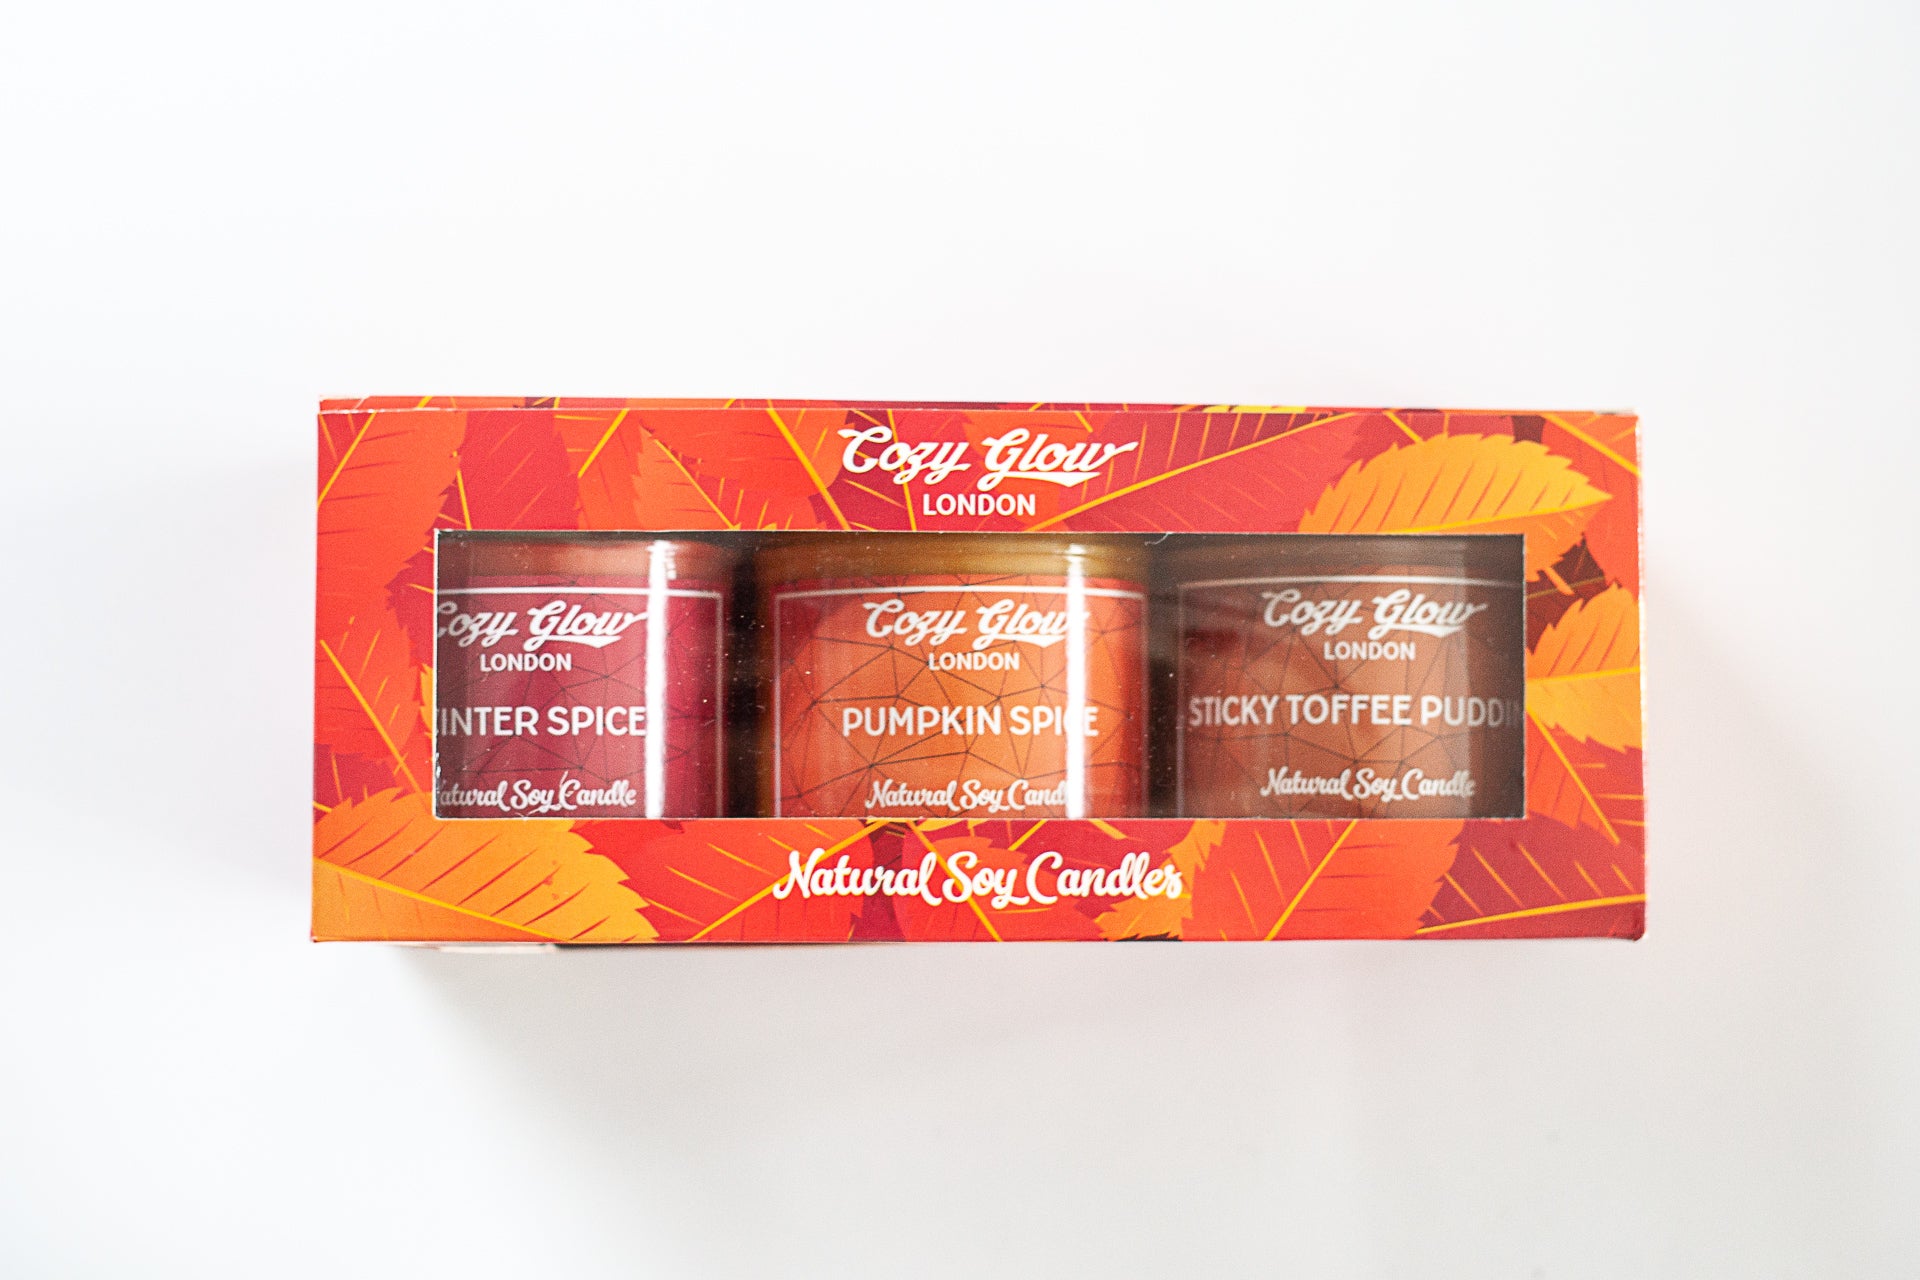 Cozy Glow Halloween Regular Soy Candles Trio
Pumpkin Spice, Winter Spice, & Sticky Toffee Pudding